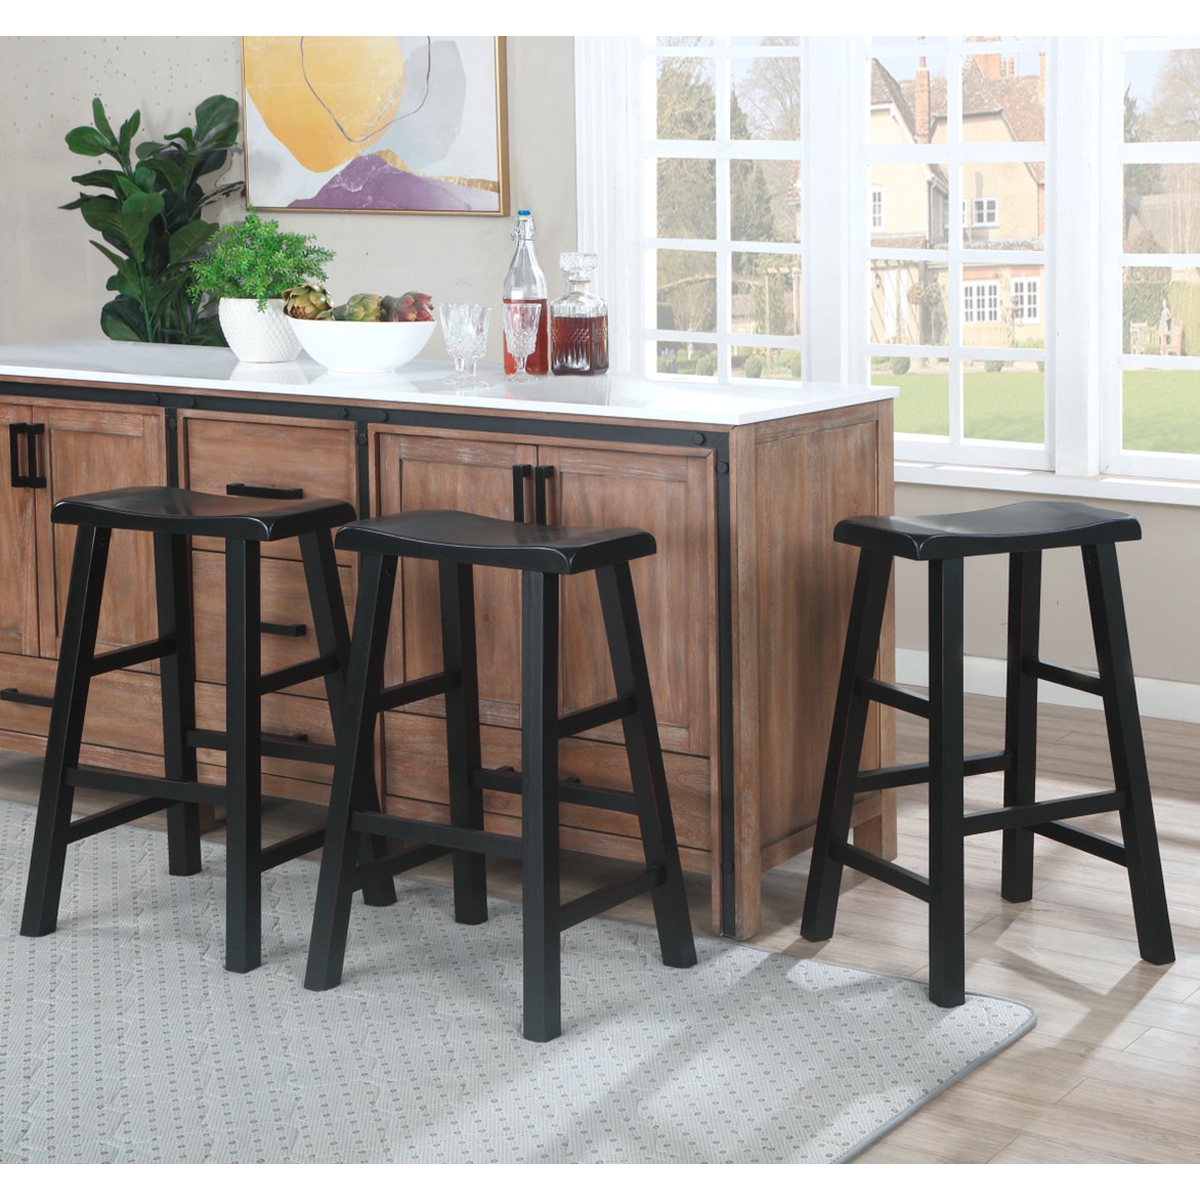 eHemco Heavy-Duty Solid Wood Saddle Seat Kitchen Counter Barstools, 29 Inches, Antique Black with Red Edging, Set of 3 - image 5 of 7